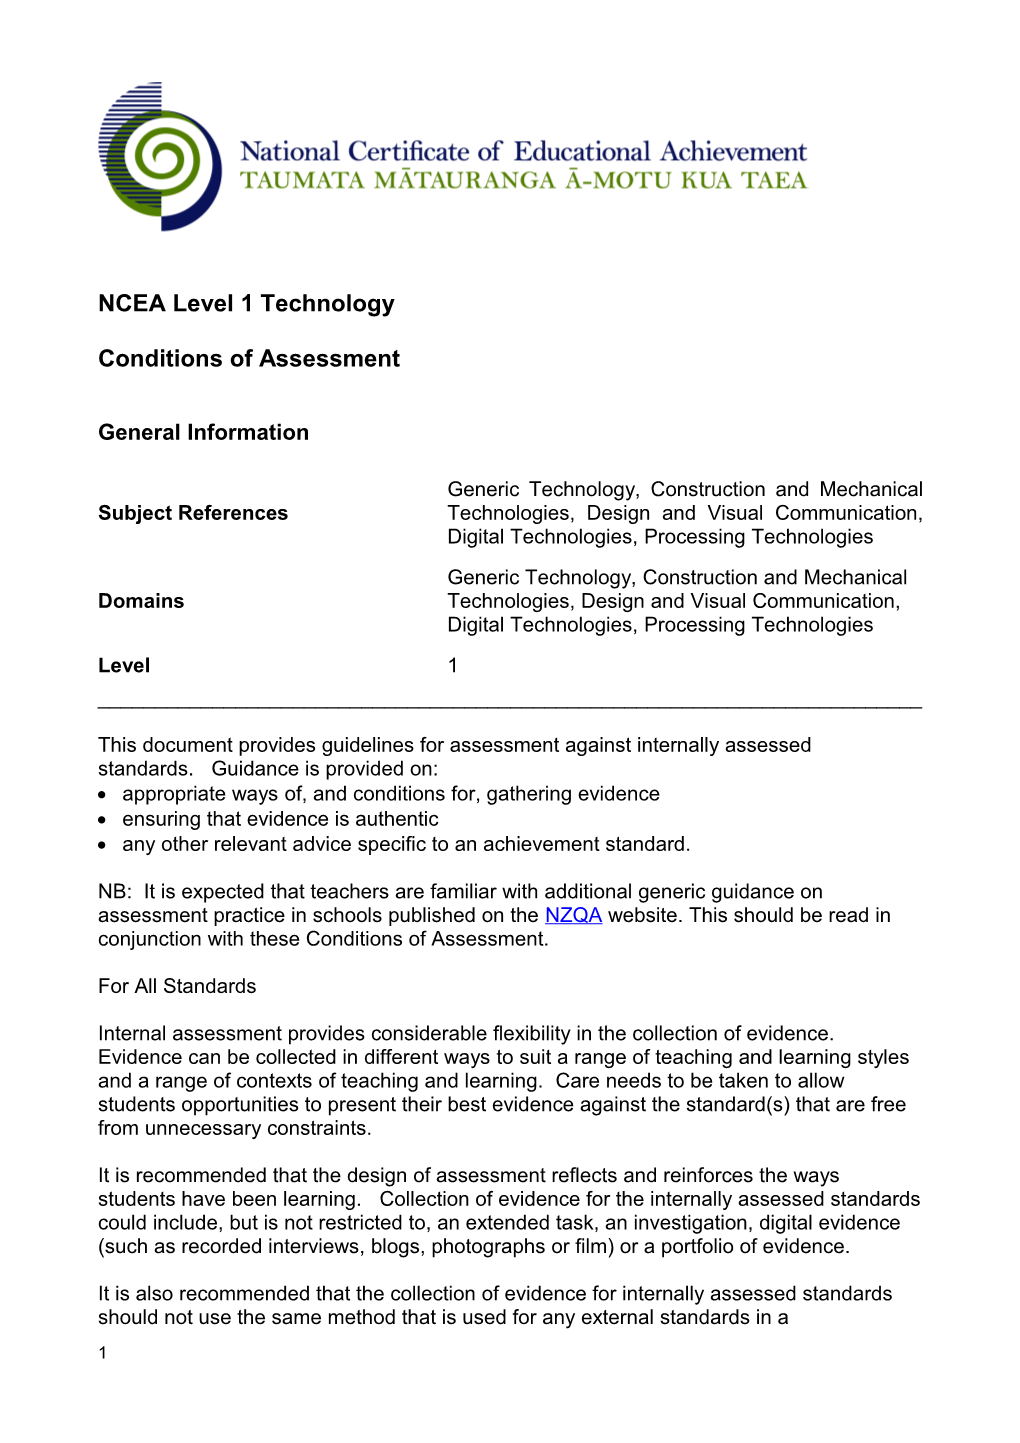 Technology L1 Conditions of Assessment